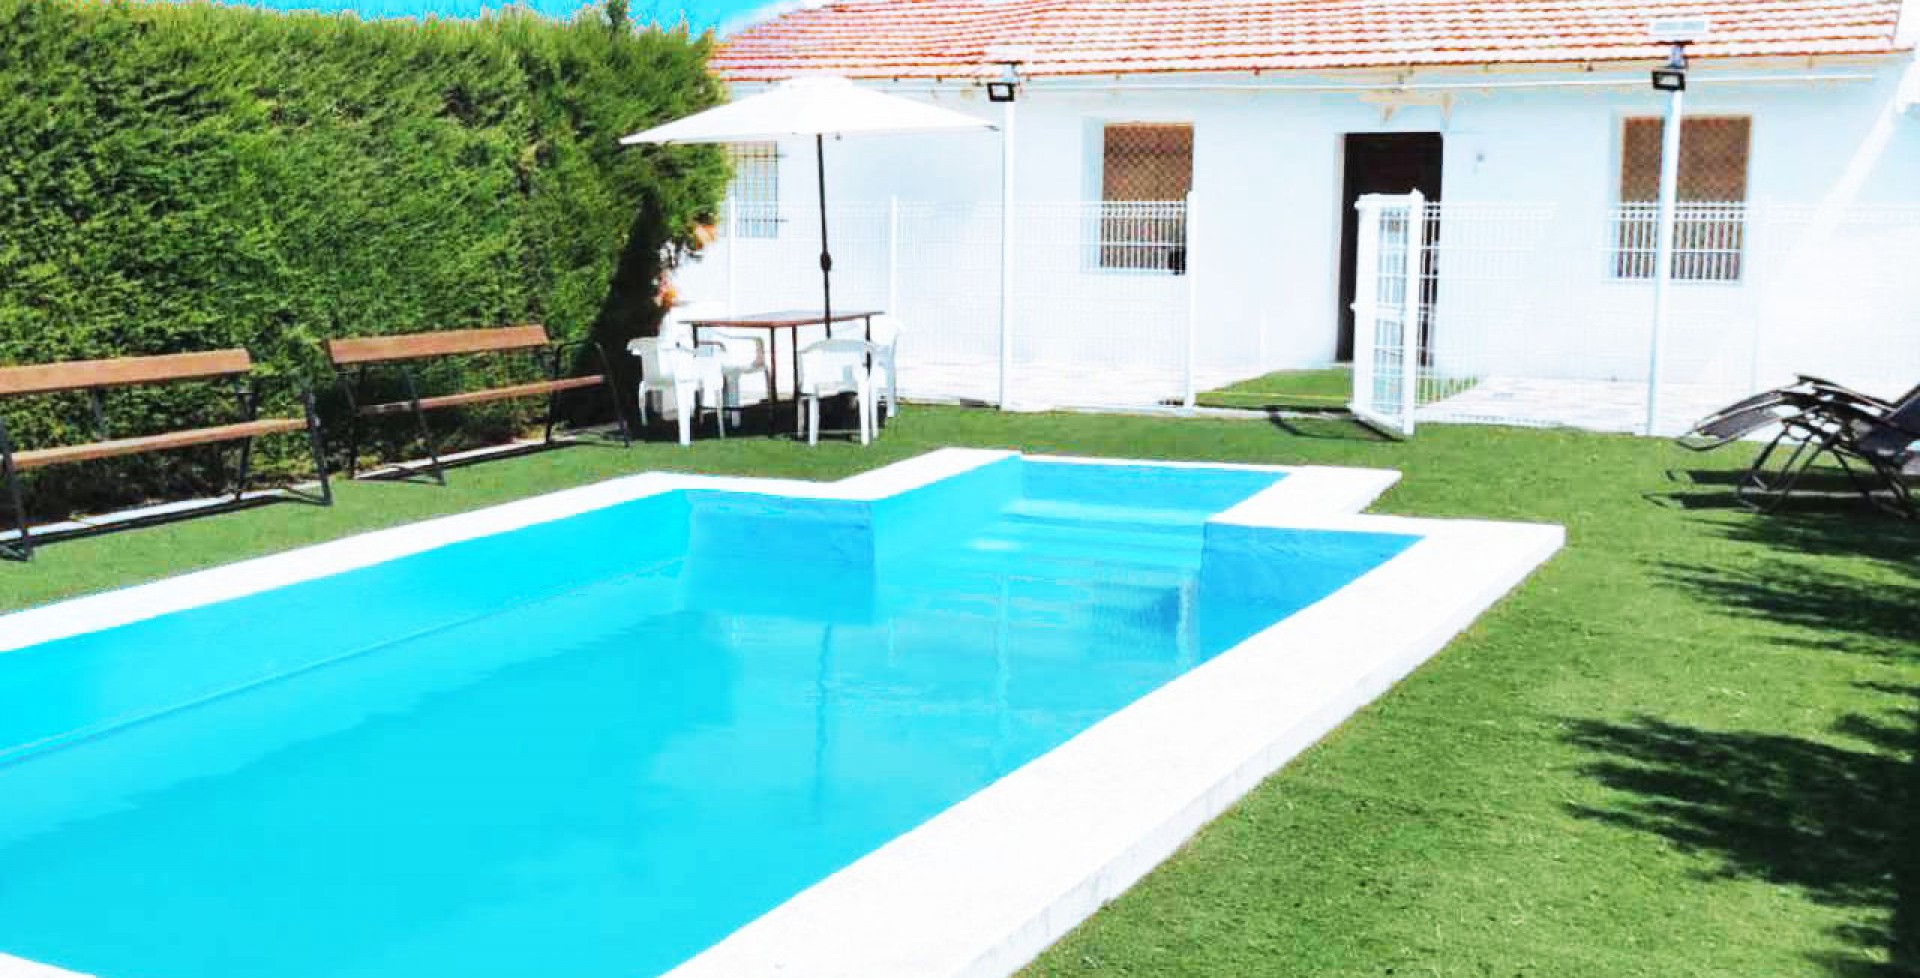 Large country house with spacious swimming pool, Abaran, Murcia, Spain